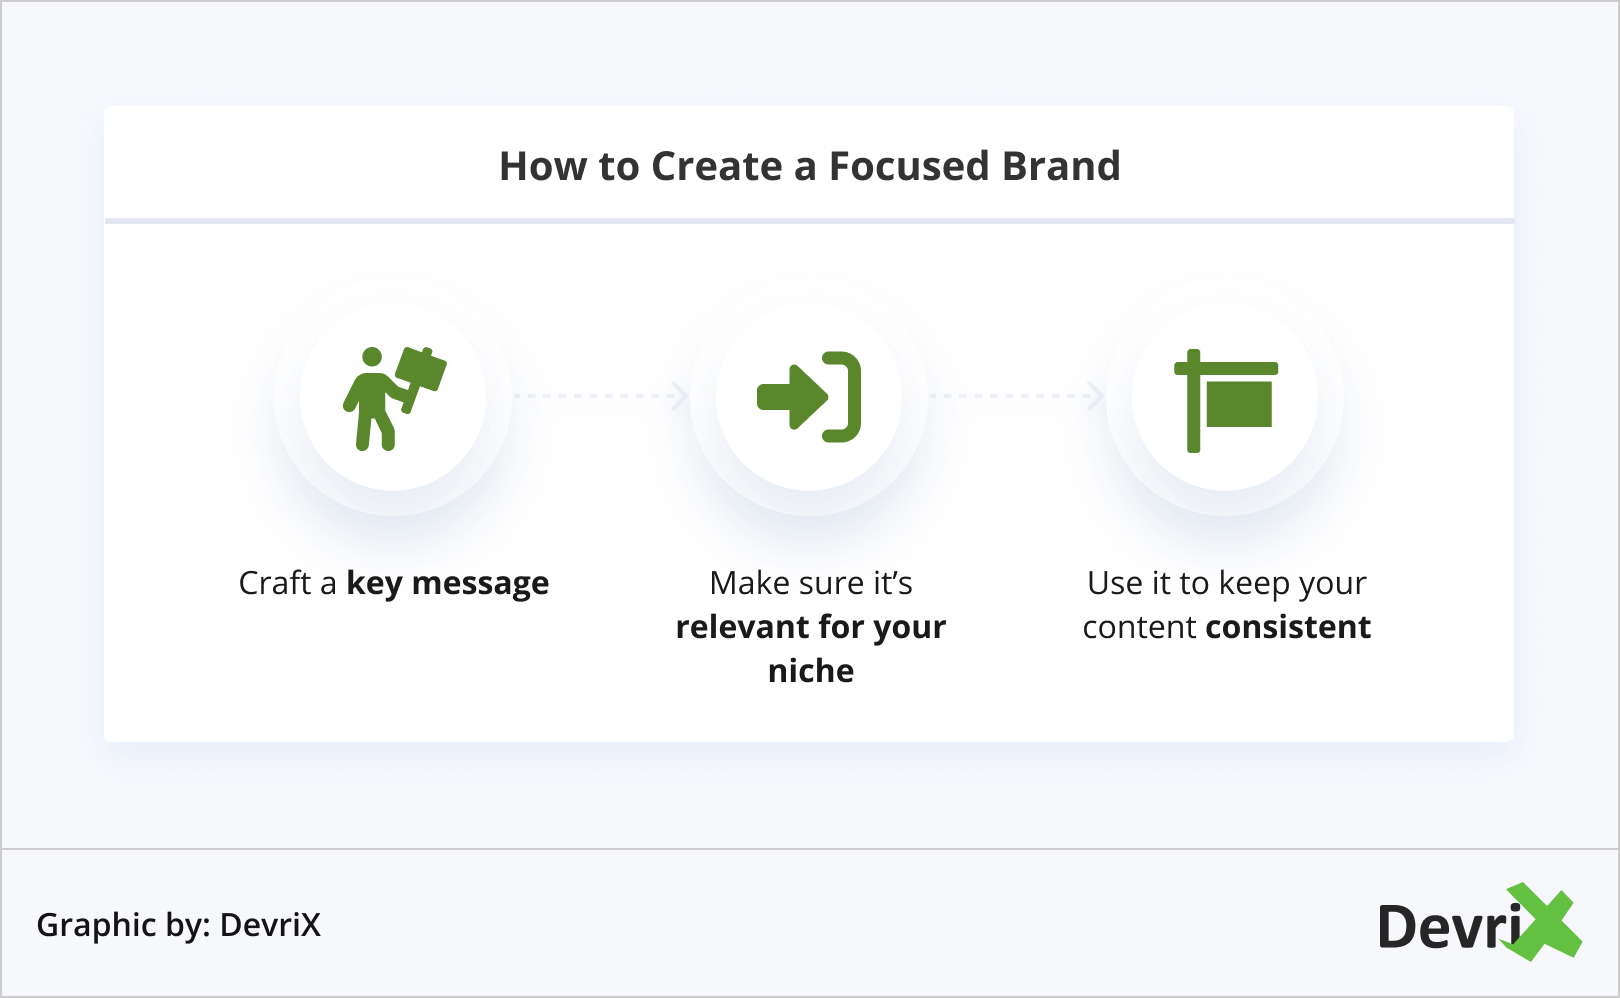 How to Create a Focused Brand